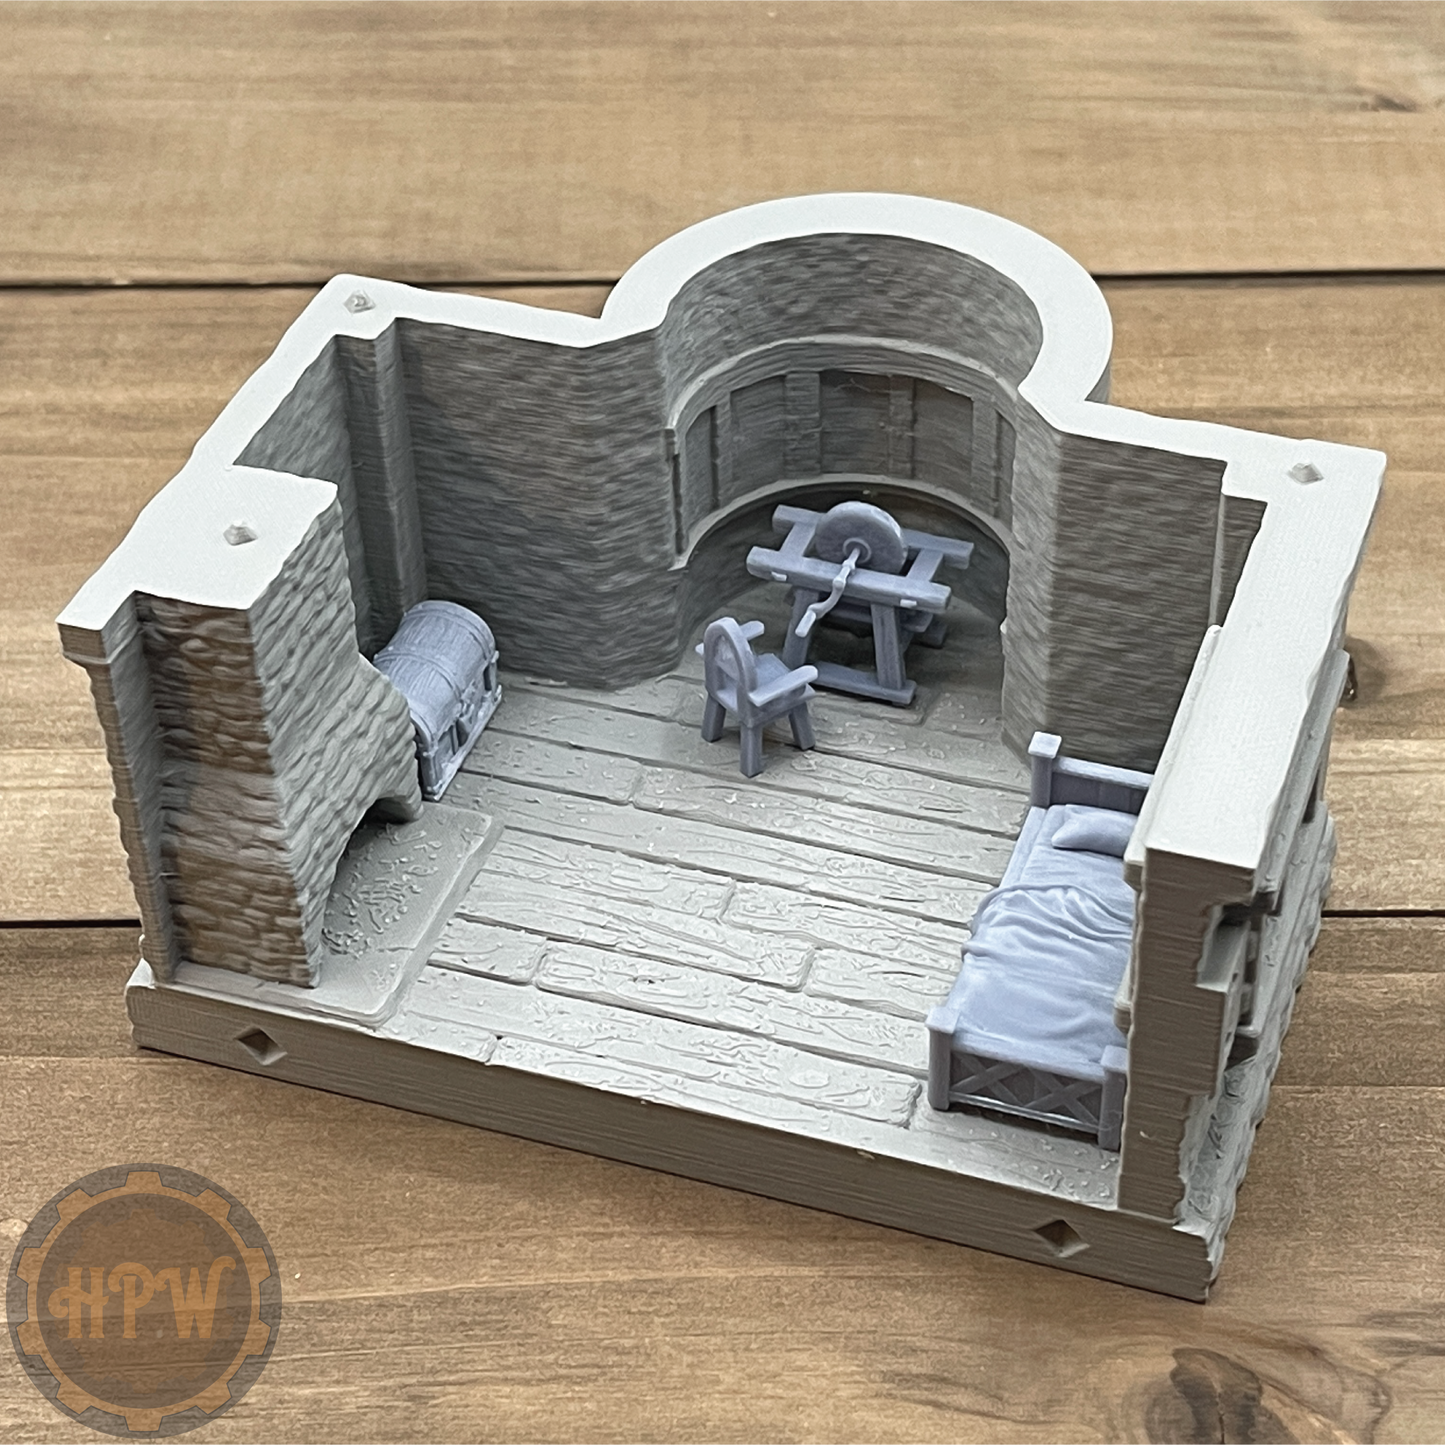 Founder's Cottage Furnishings | Tabletop Decorations | Miniature Gaming Scatter Terrain | Phoenix Foundry